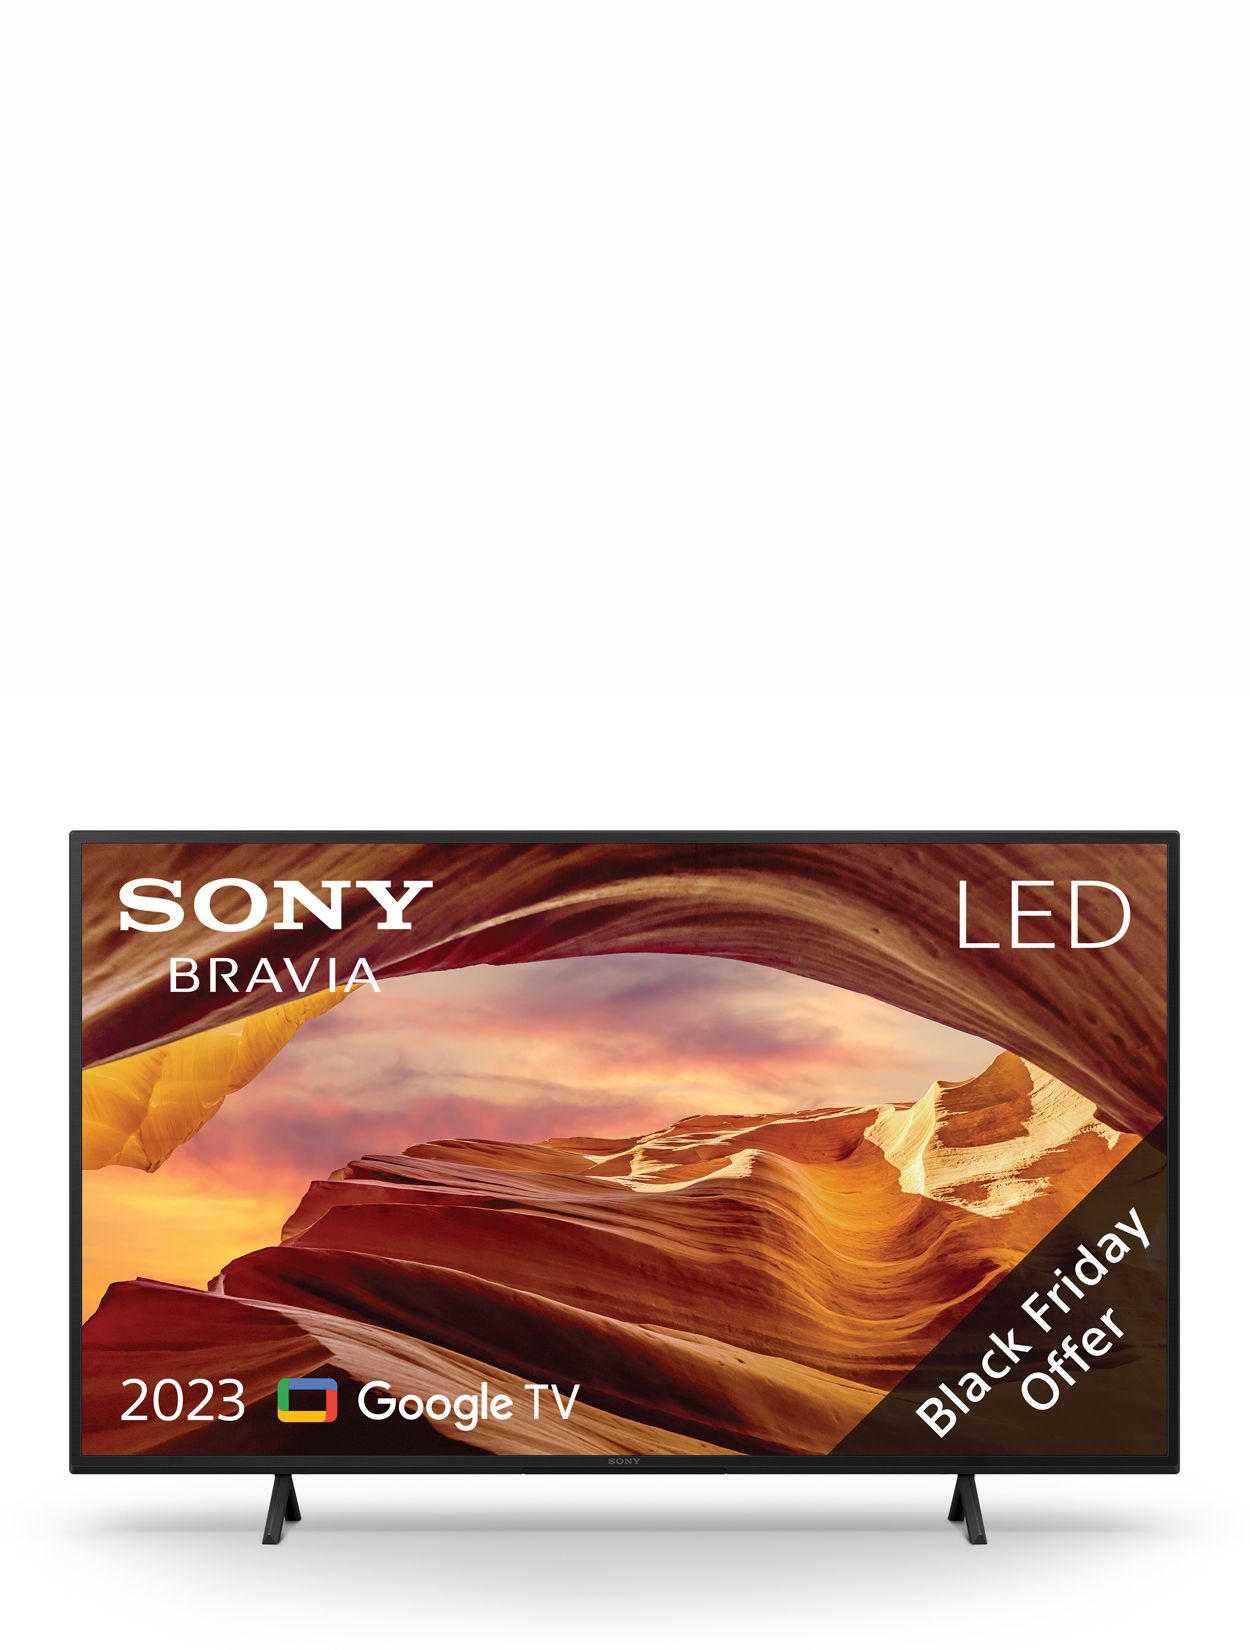 Sony Bravia KD50X75WL (2023) LED HDR 4K Ultra HD Smart Google TV, 50 inch with Youview/Freesat HD & Dolby Atmos, Black